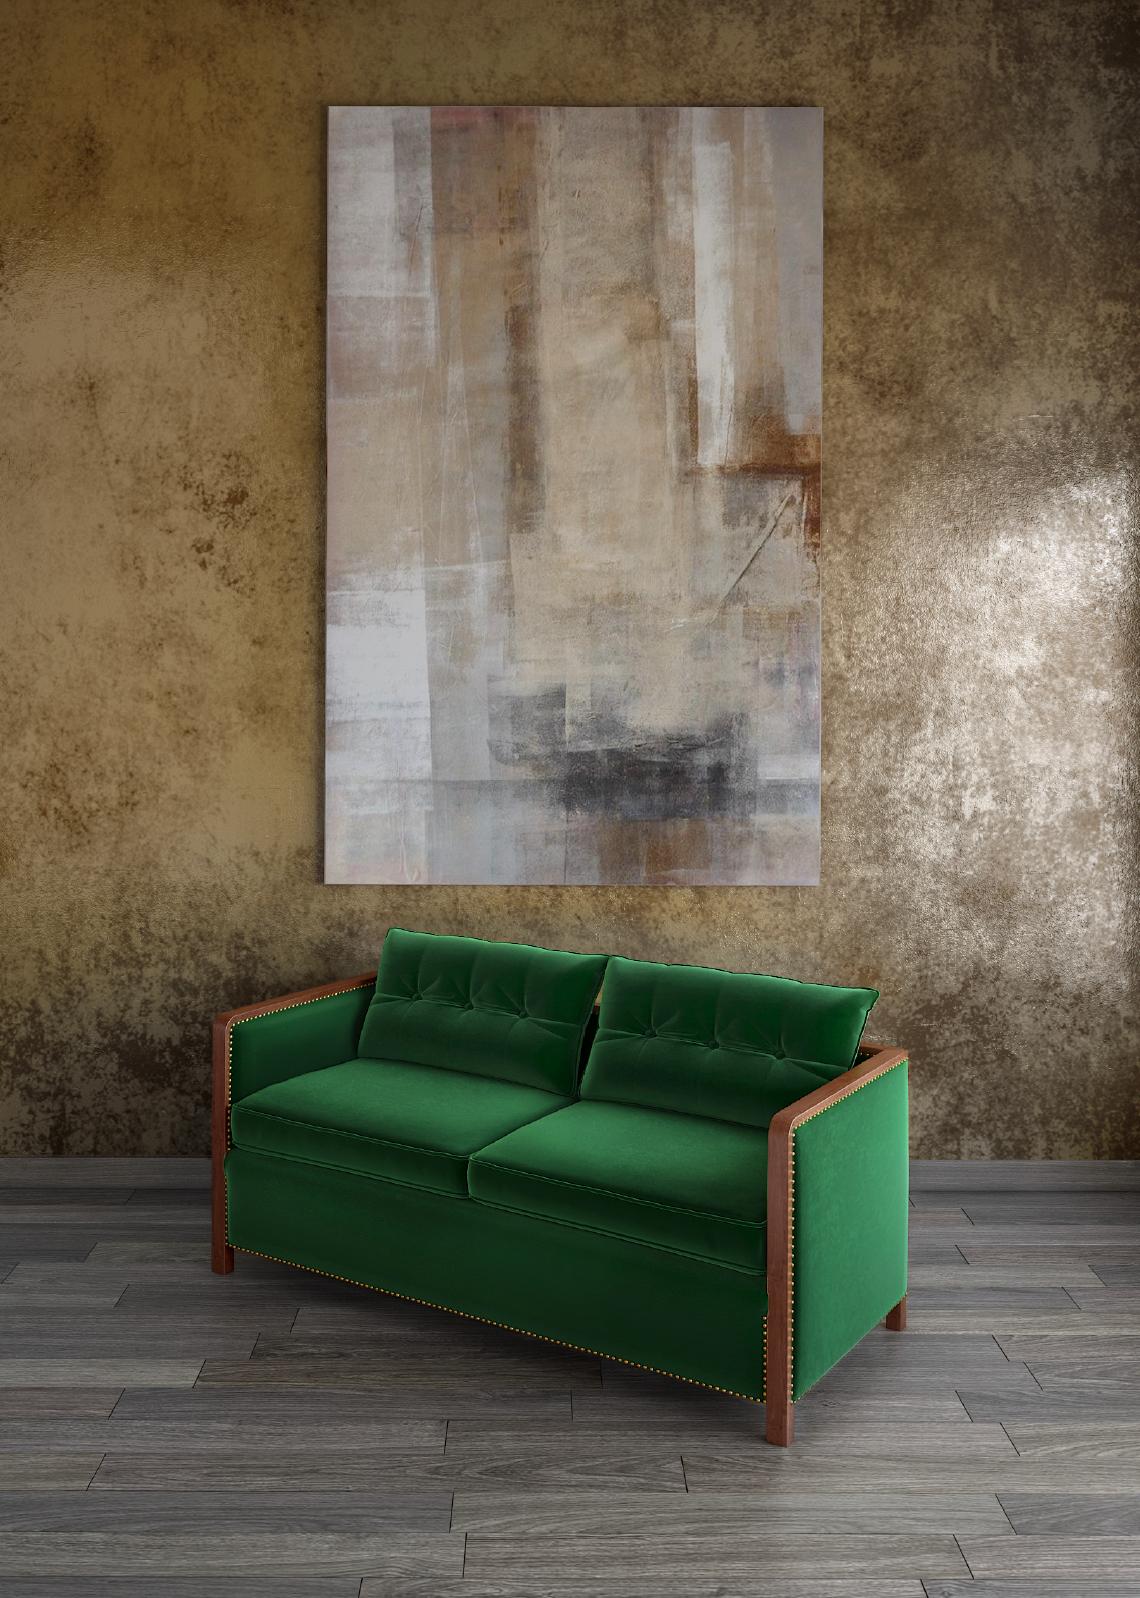 Utterly lounge worthy, the Bacco sofa design is a contemporary remodel of the iconic boxy chair.

Pushing the boundaries in design and playing around with different textures and finishes, the Boxy Bacco sofa blends combines a chic mix of materials